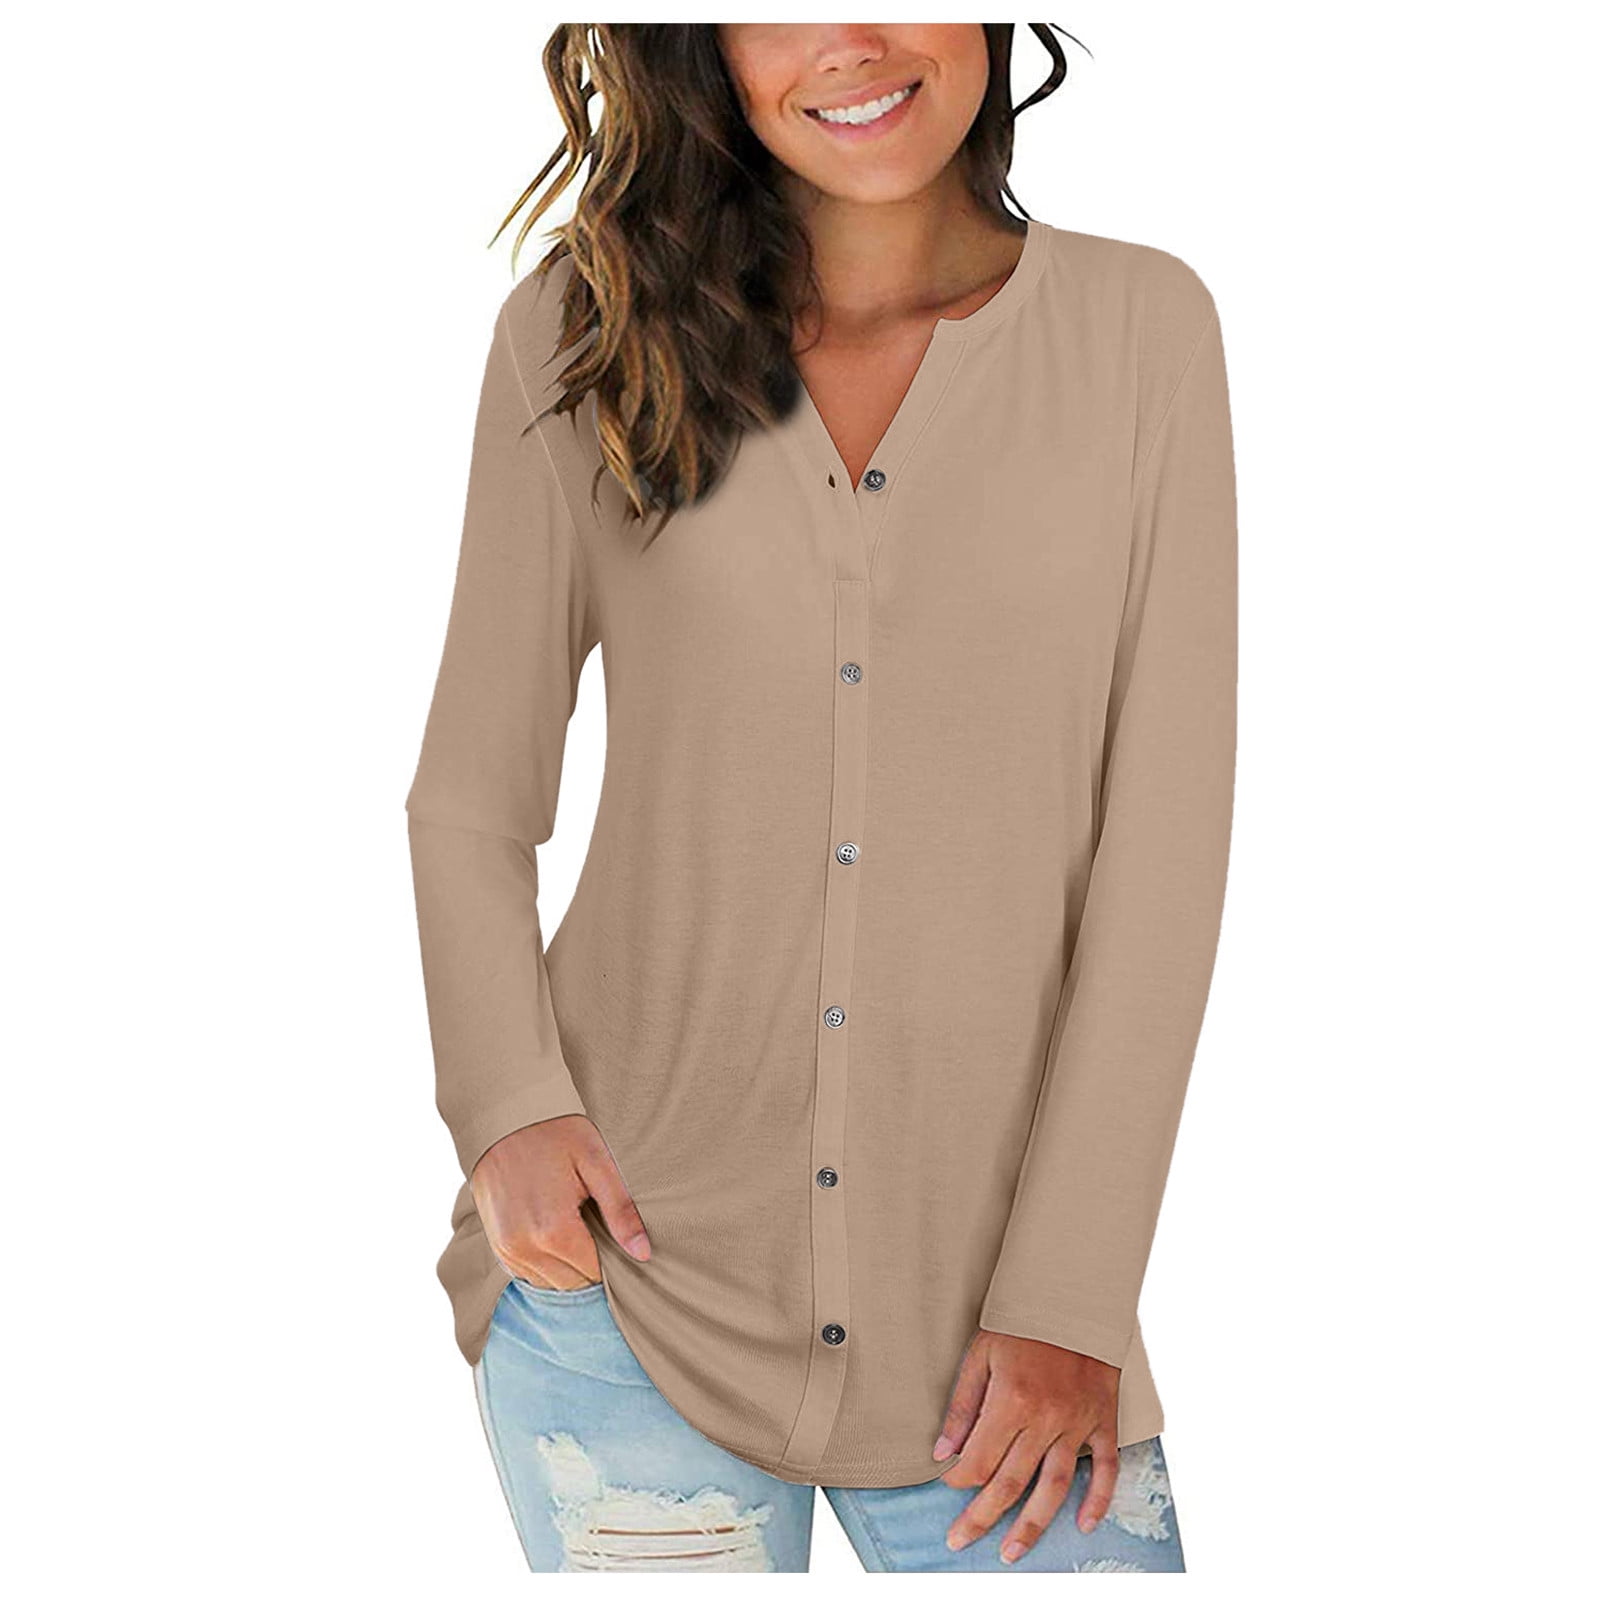 V Neck Tops Long Sleeve Button Cardigan Casual Womens Loose T-Shirt Blouse Down 